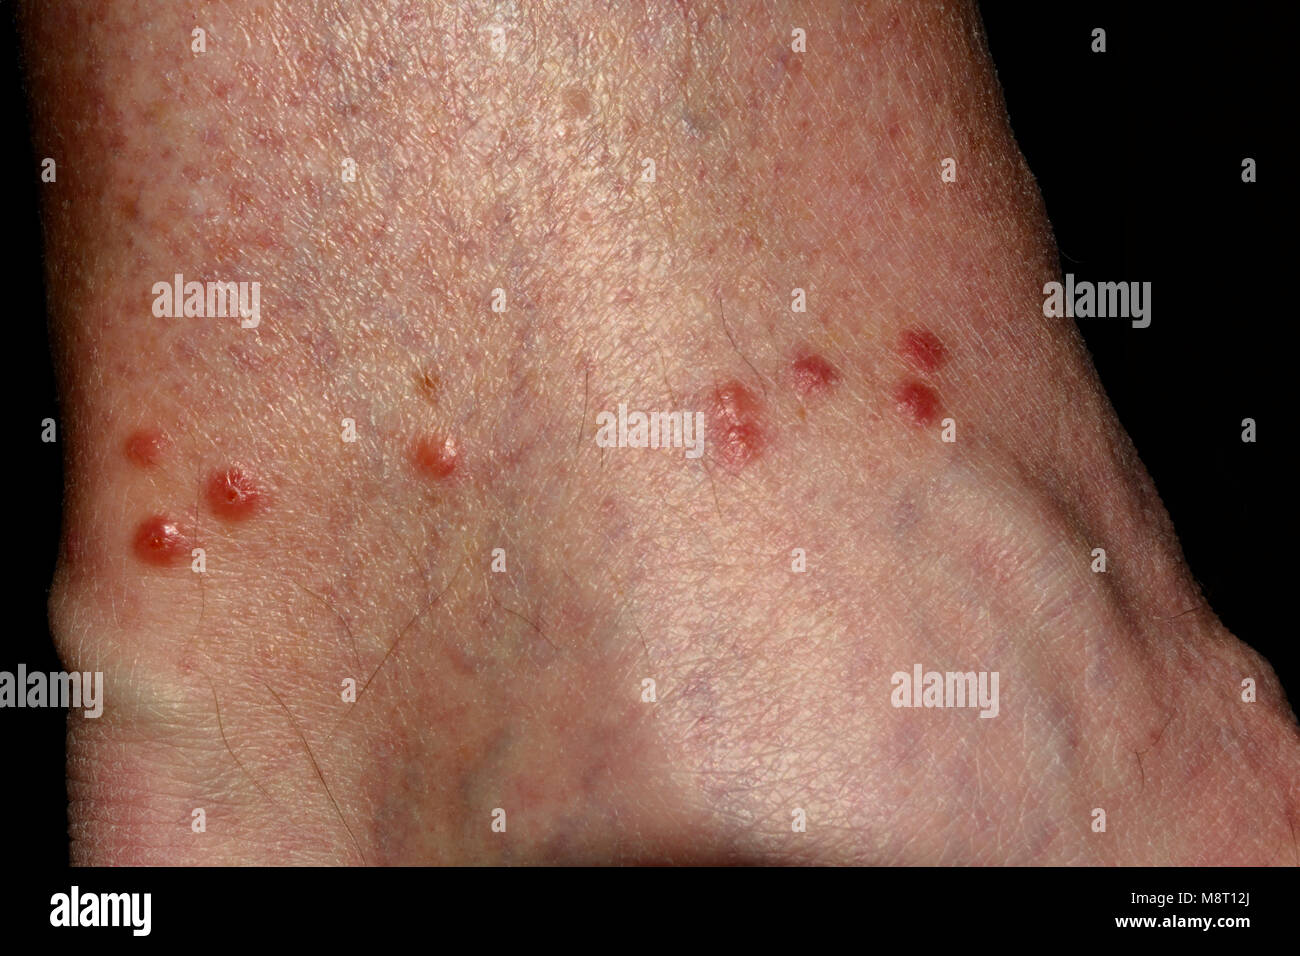 Row of Bed Bug bites to 65-year old man's ankle, Colorado US. Caused by one adult Bed Bug that has not had a blood meal in some time. Found worldwide. Stock Photo